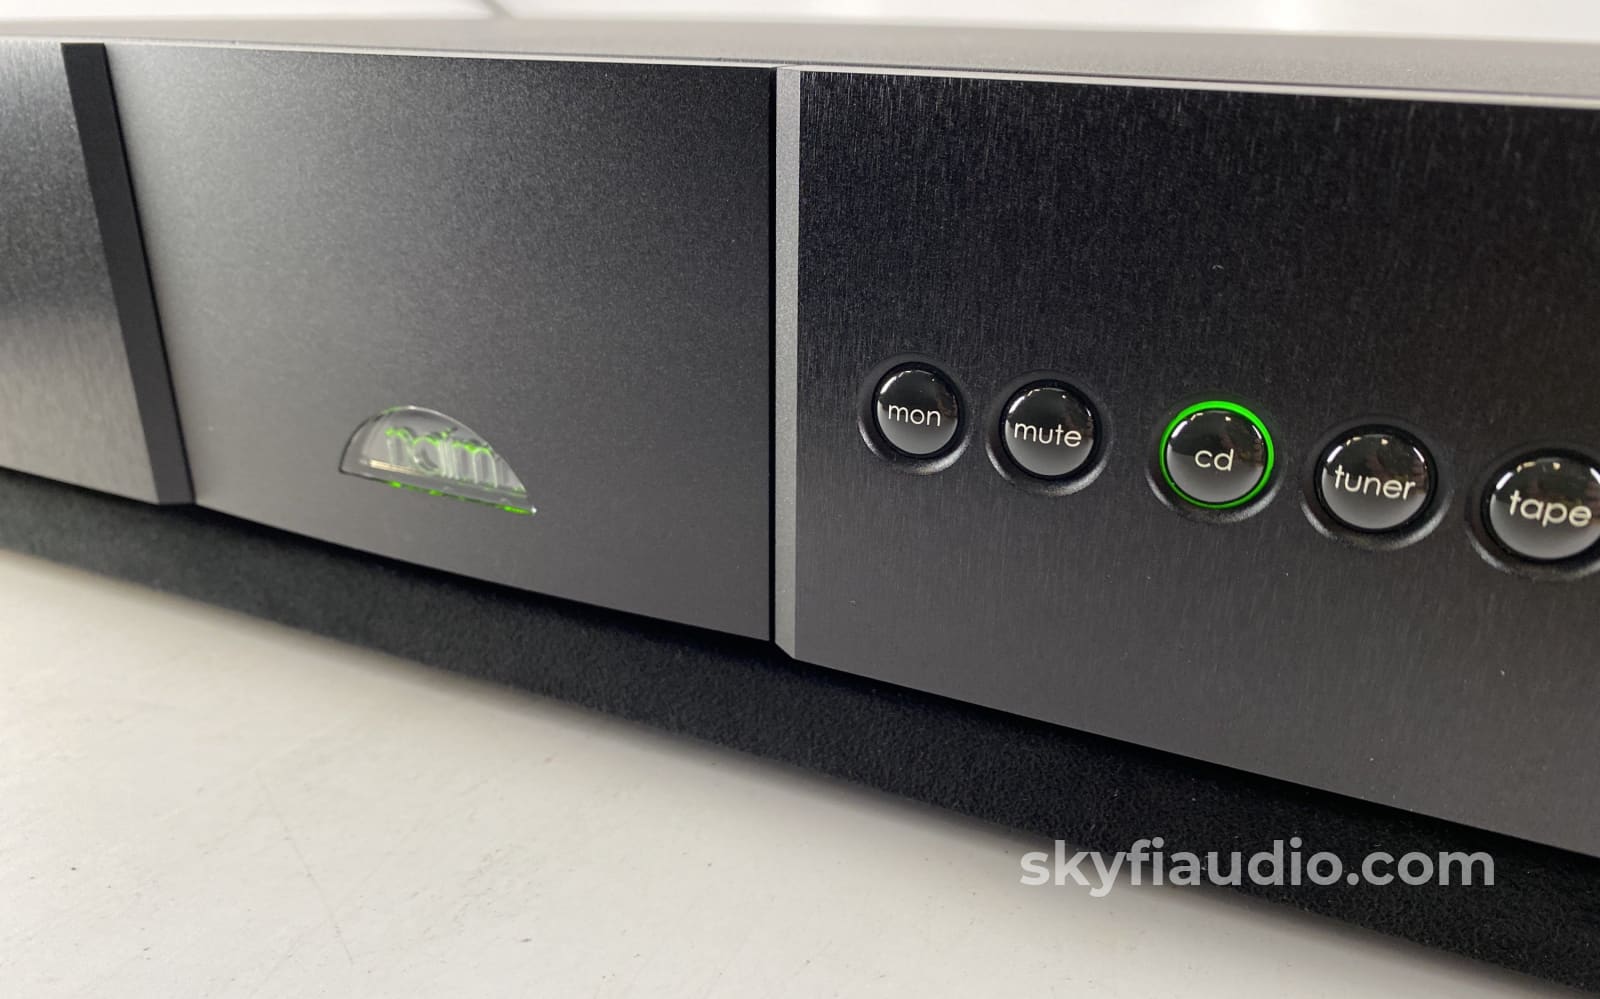 Naim Nac 202 Stereo Preamplifier With Remote - New Price